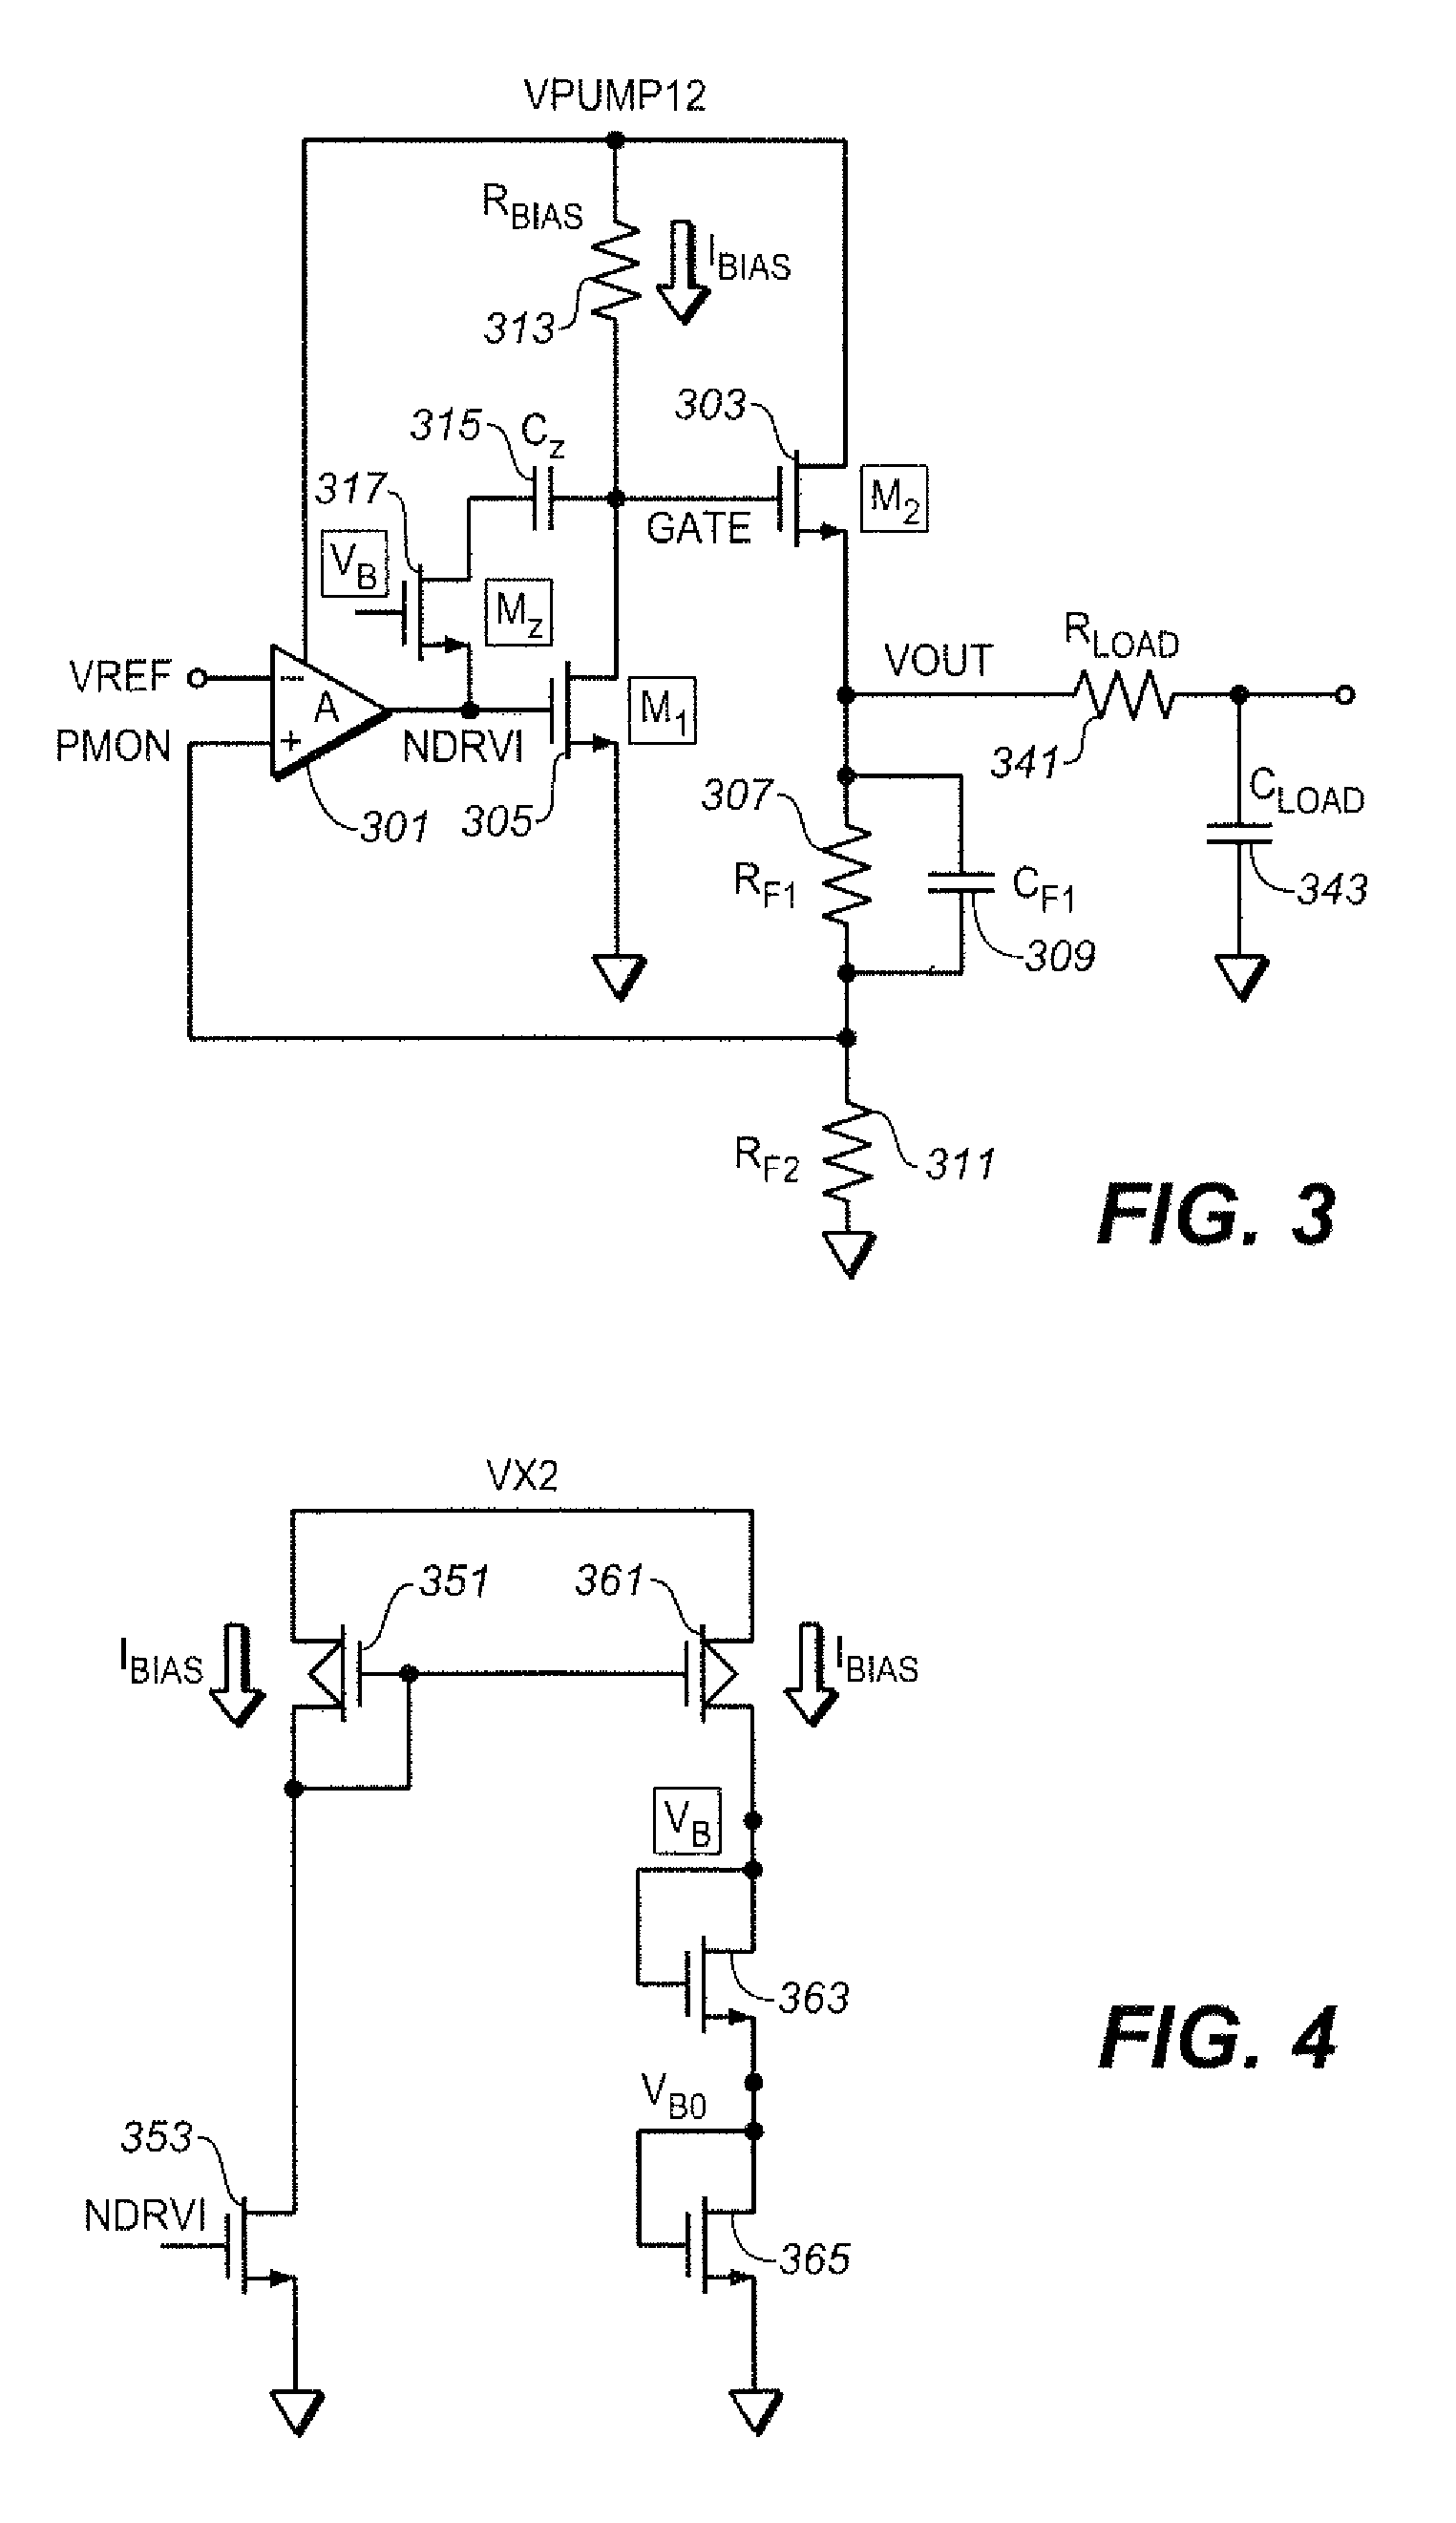 Compensation scheme to improve the stability of the operational amplifiers